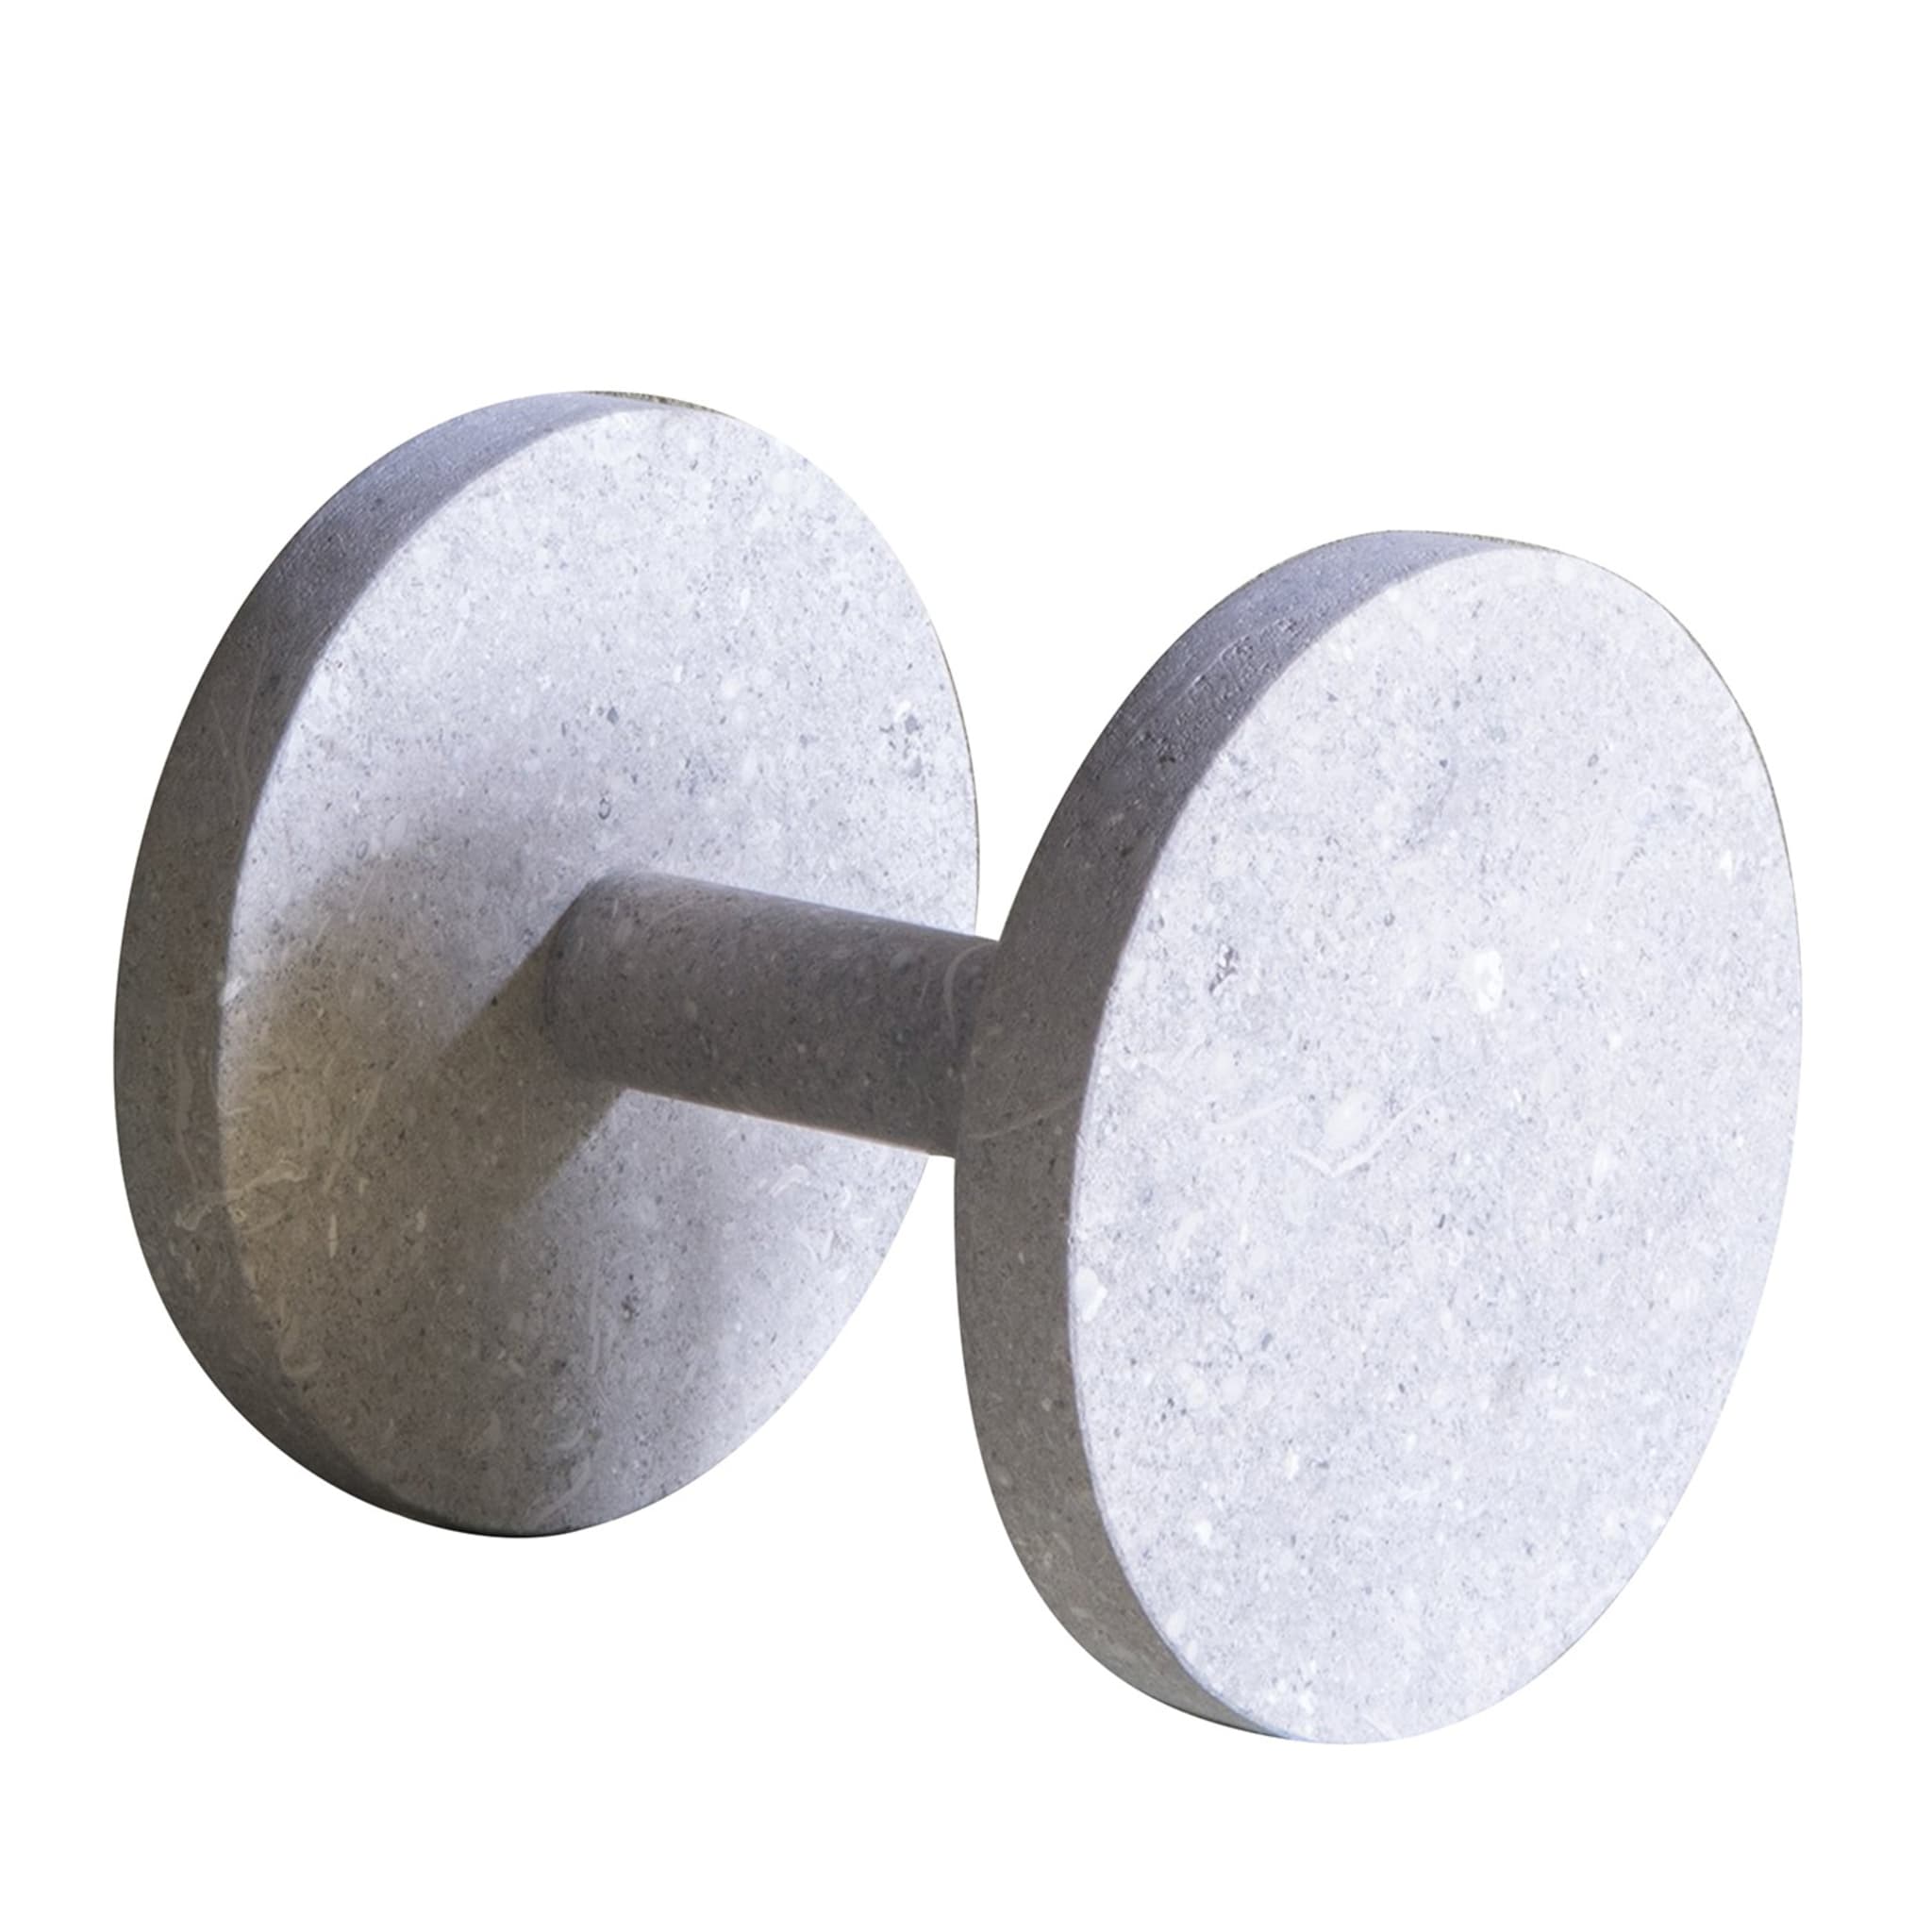 Ora Collection Set of 2 Vicenza Stone Peso Specifico Weights - Main view